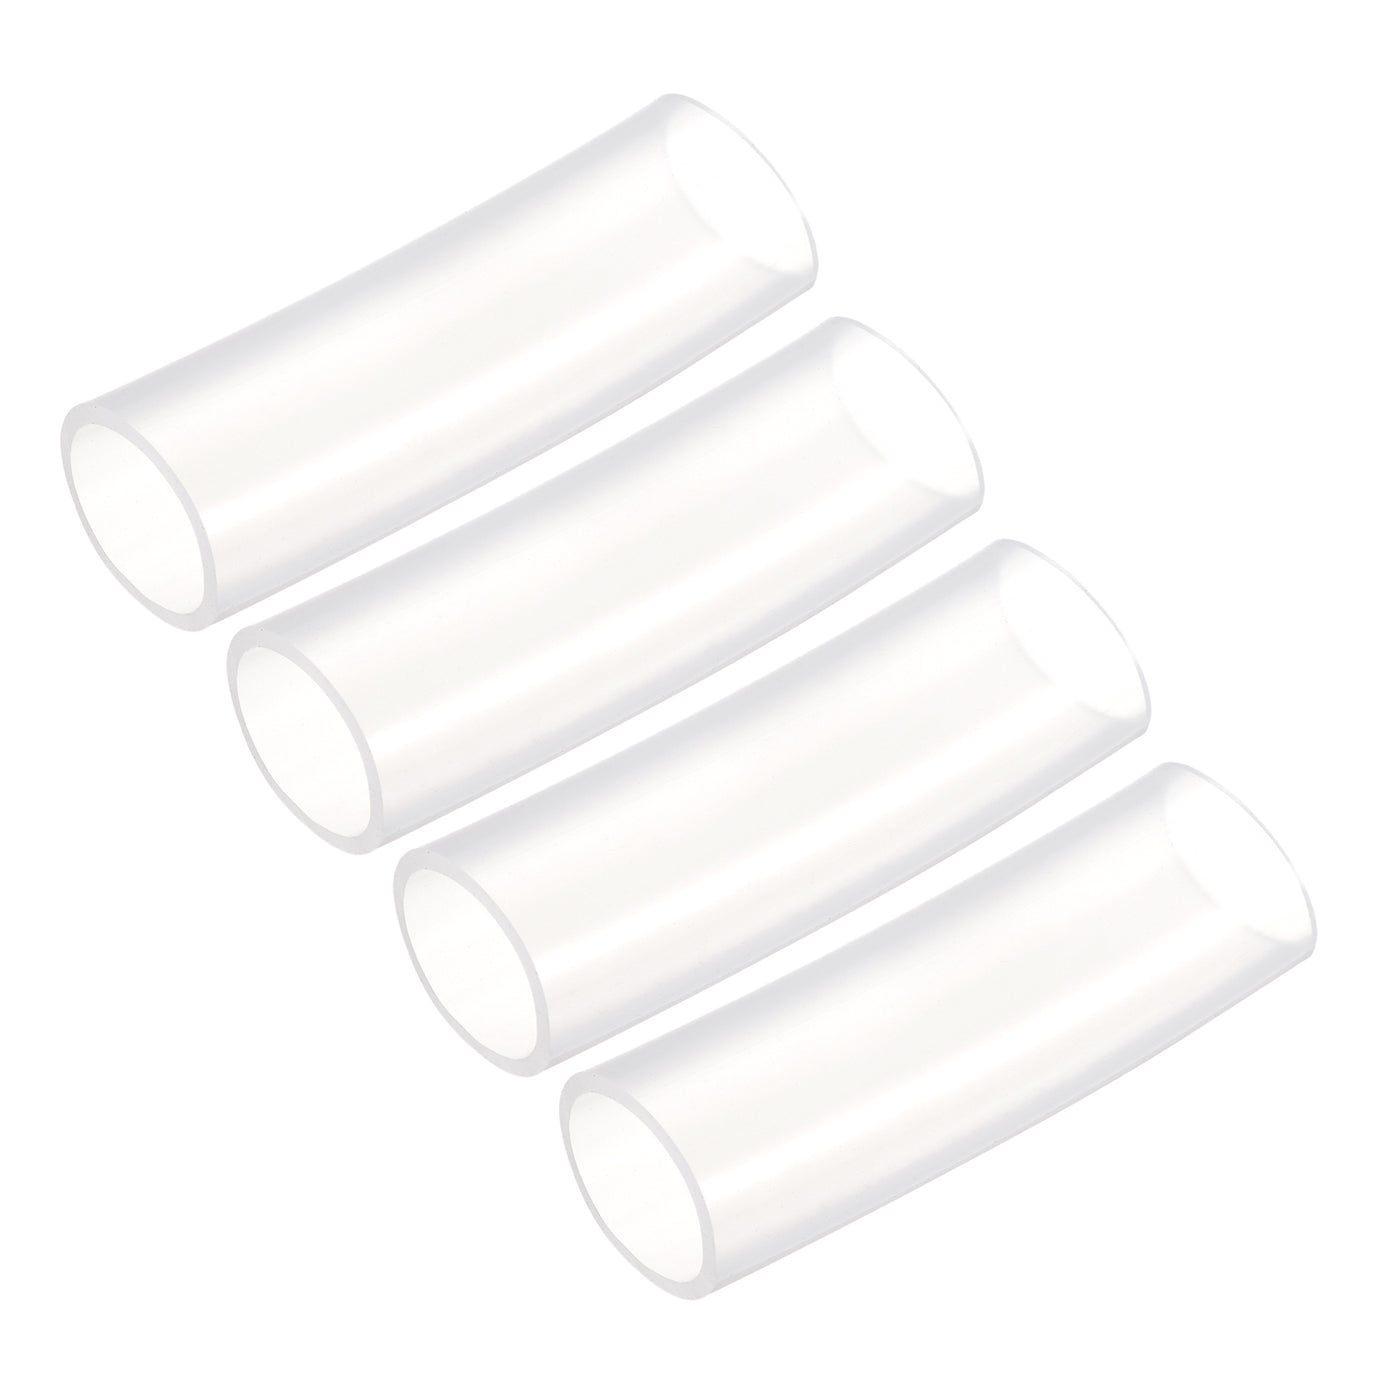 uxcell Uxcell Silicone Tubing 32mm ID,38mm OD 4Pcs 0.33 Ft for Pump Transfer, Transparent